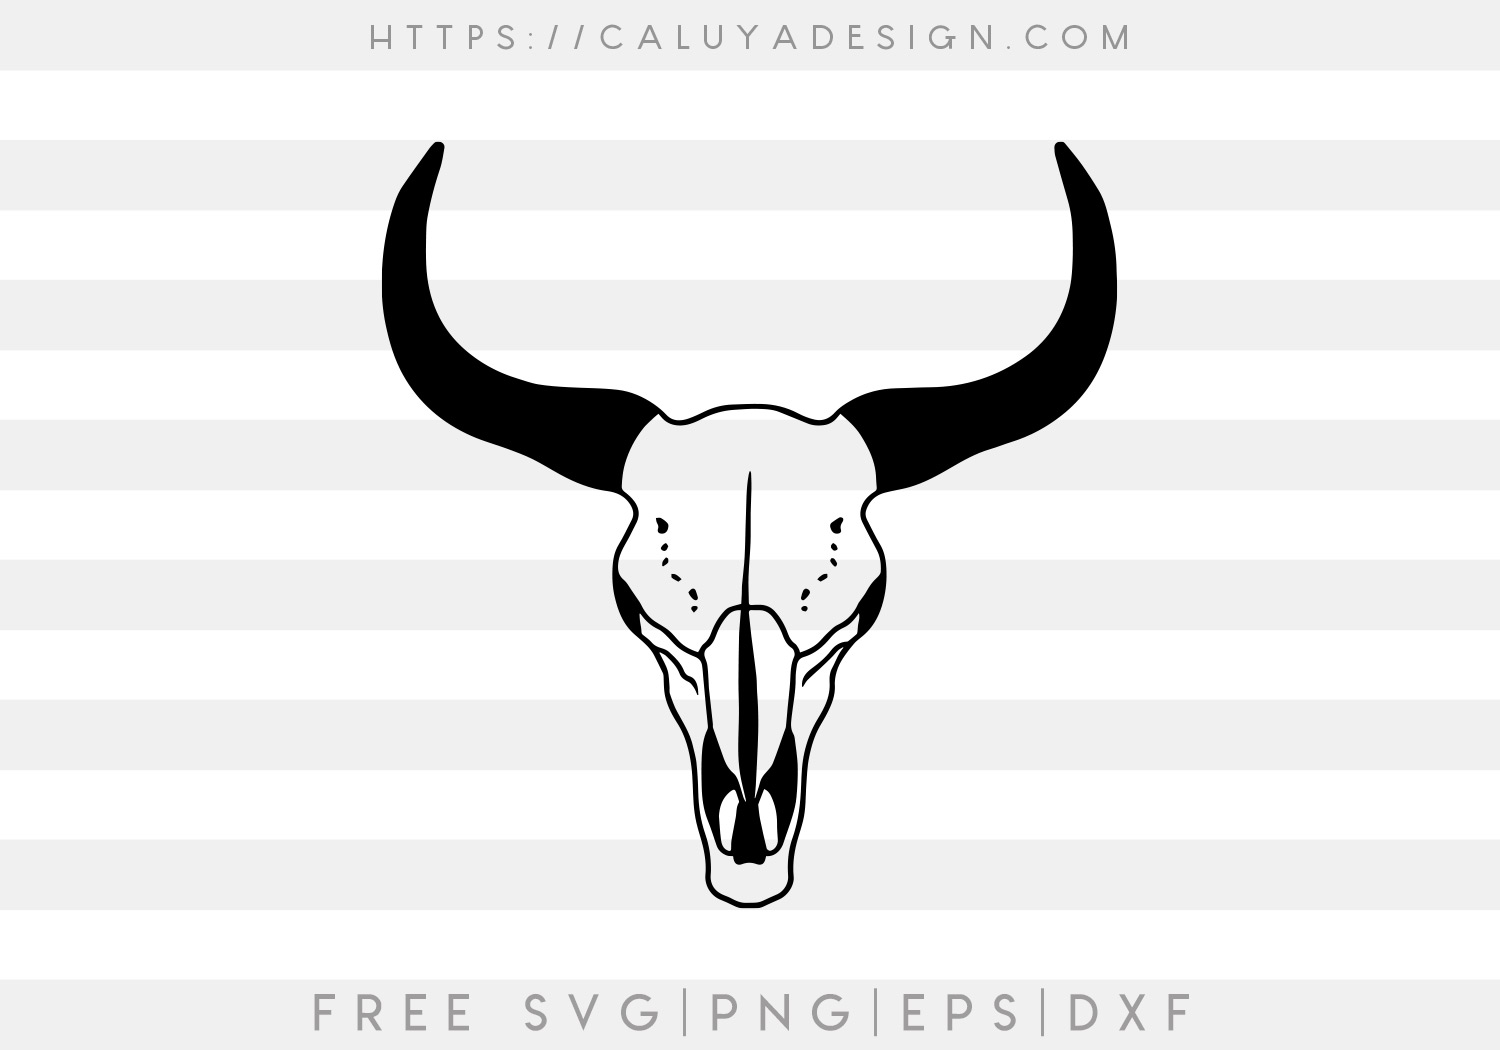 Download Free Hand Drawn Cow Skull Svg Png Eps Dxf By Caluya Design